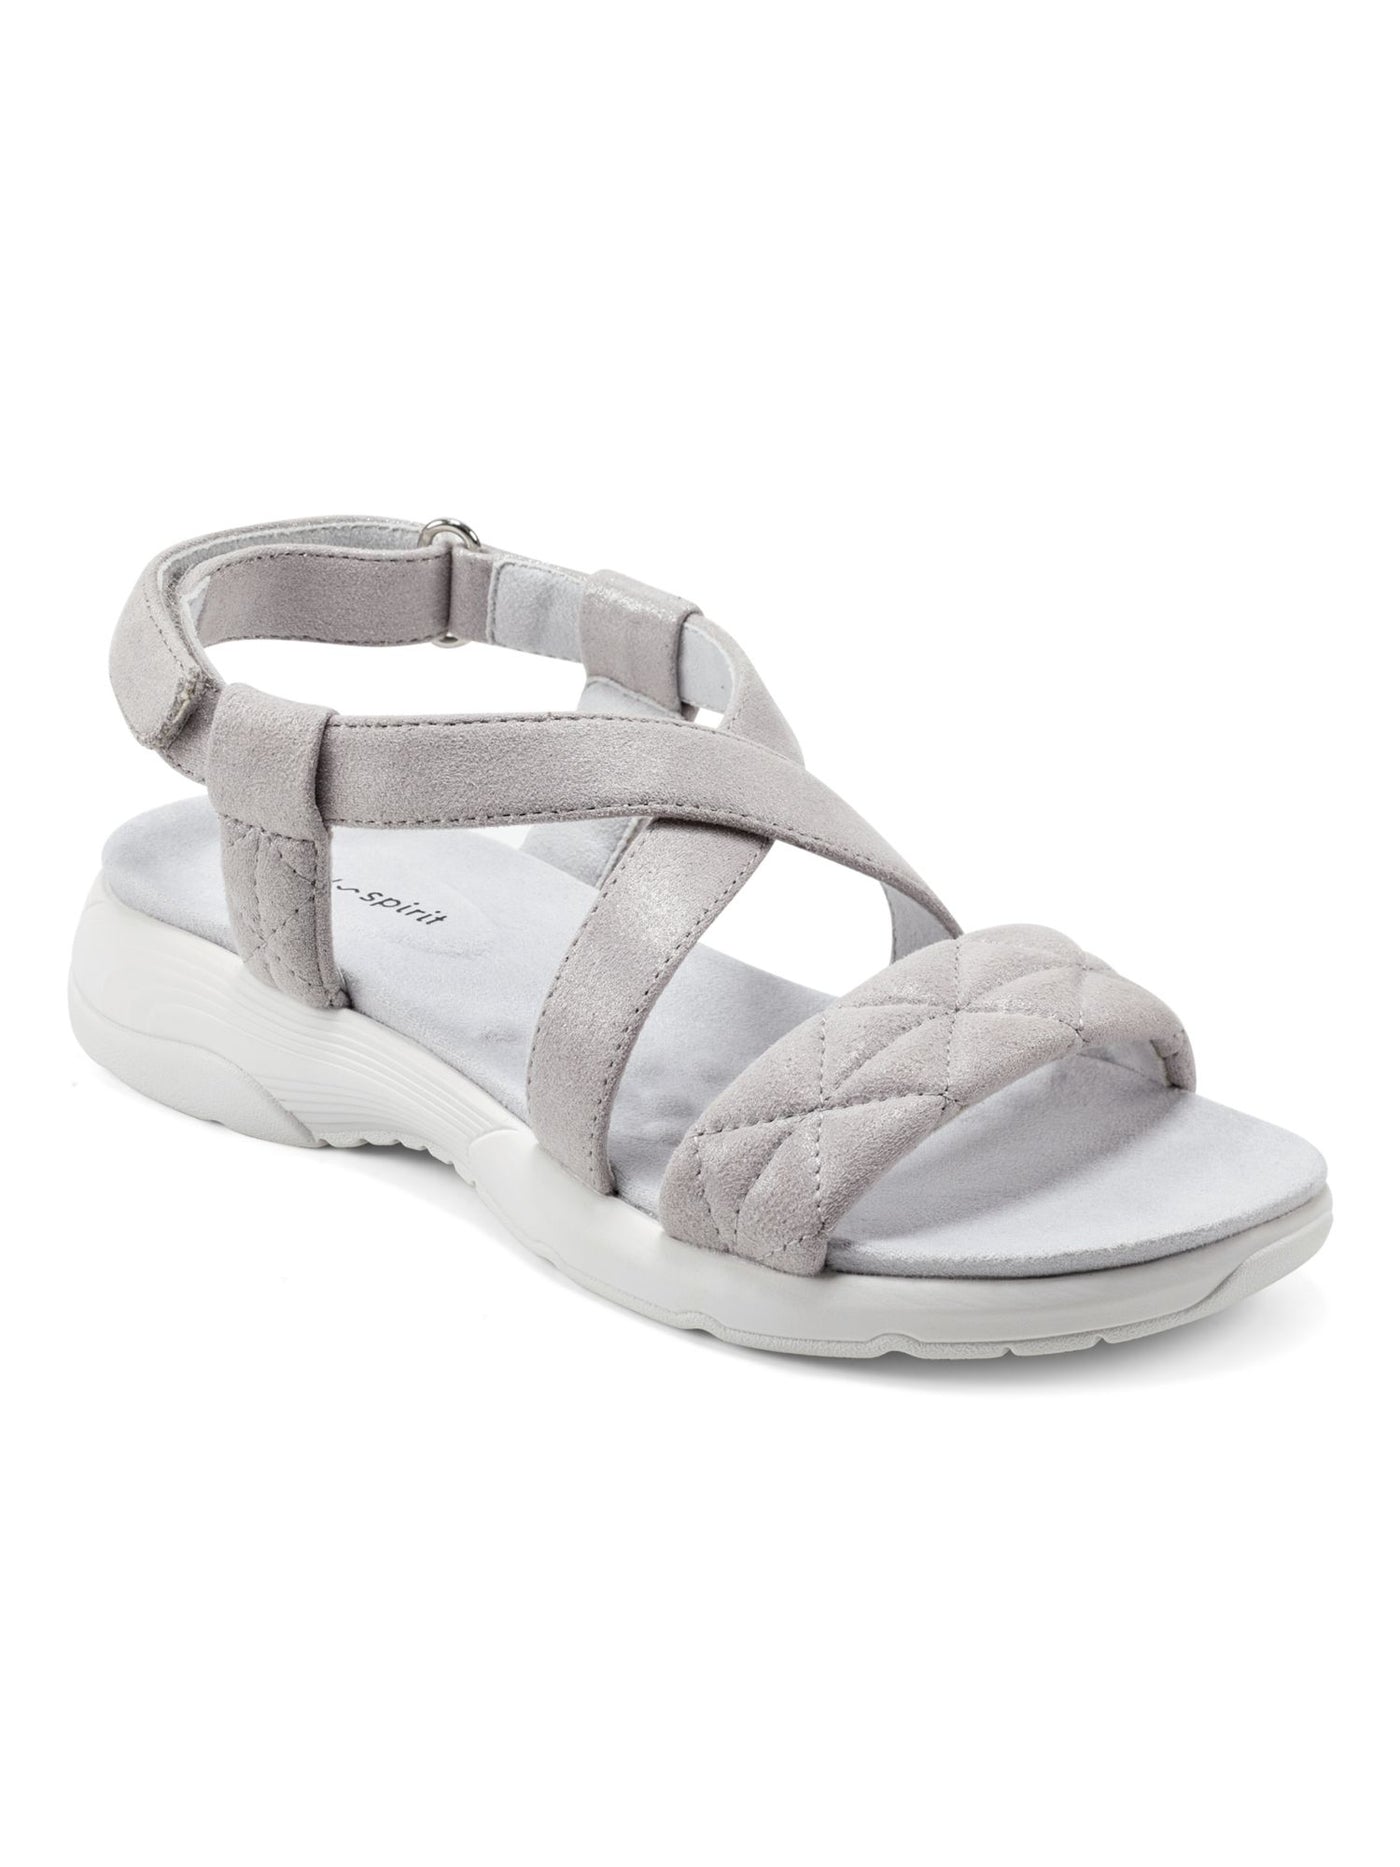 EASY SPIRIT Womens Silver Strappy Cushioned Arch Support Treasur Round Toe Wedge Slingback Sandal 8.5 M